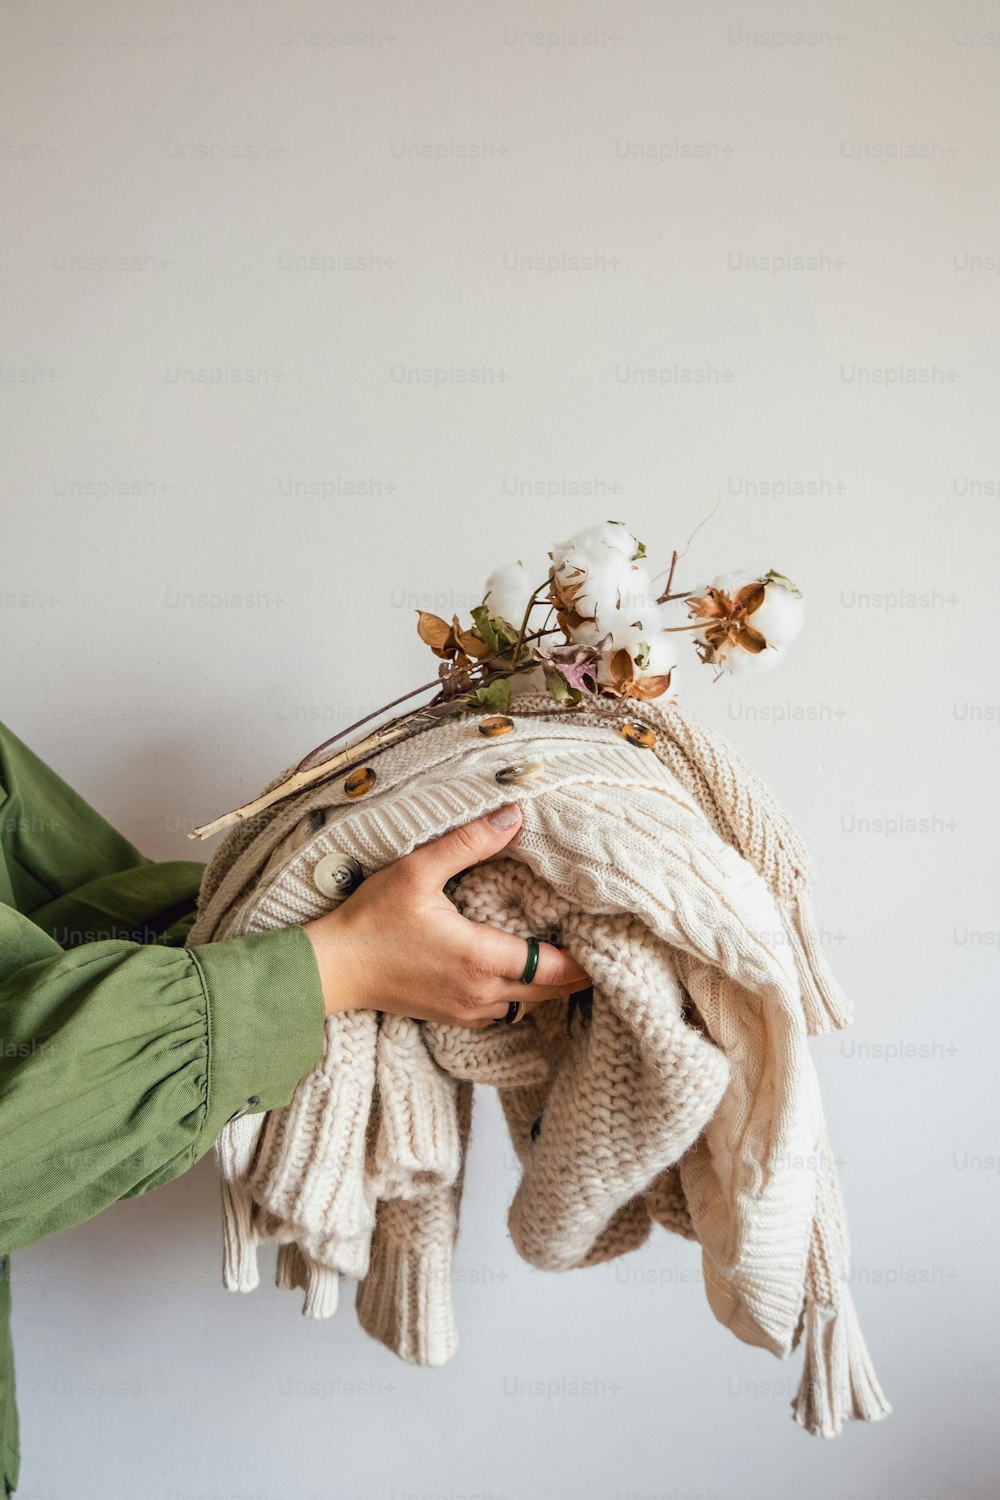 a person holding a pile of sweaters and flowers